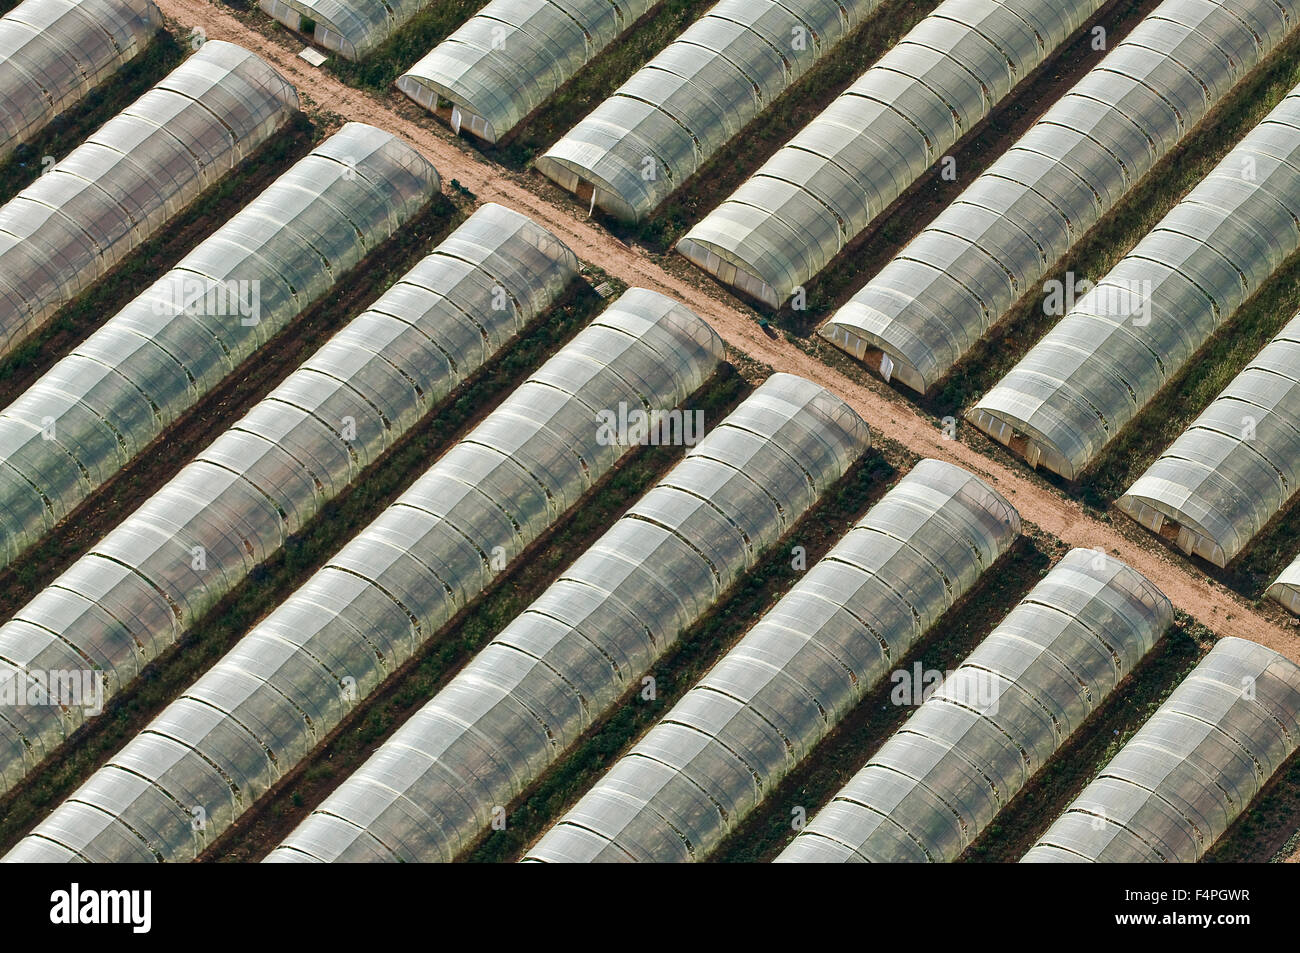 Aerial image of greenhouses Stock Photo